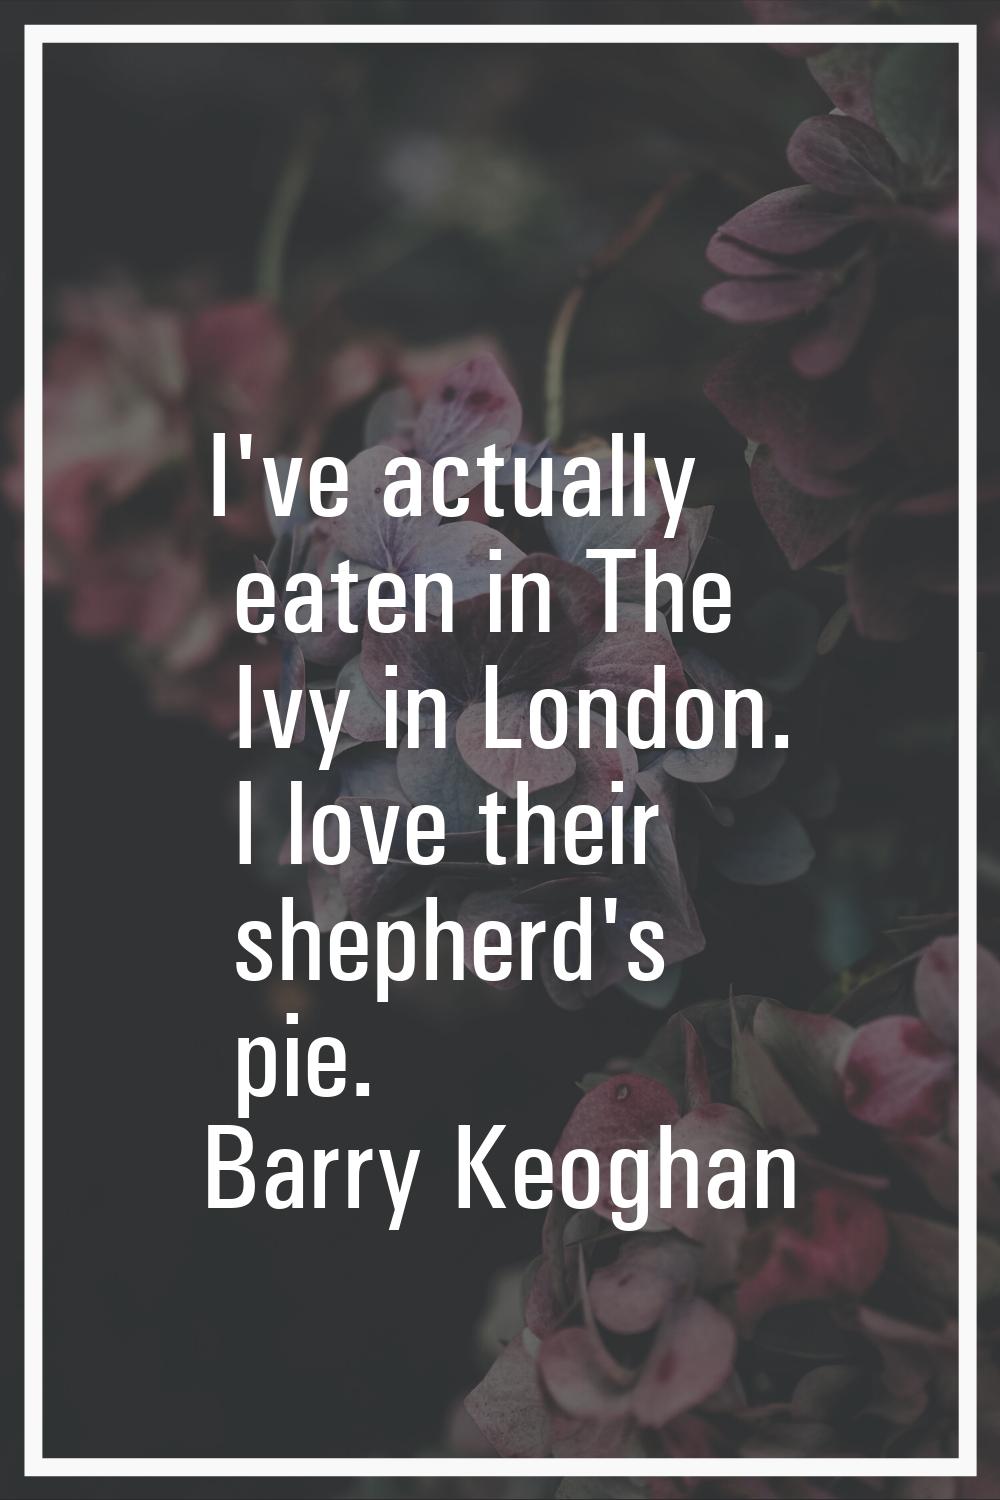 I've actually eaten in The Ivy in London. I love their shepherd's pie.